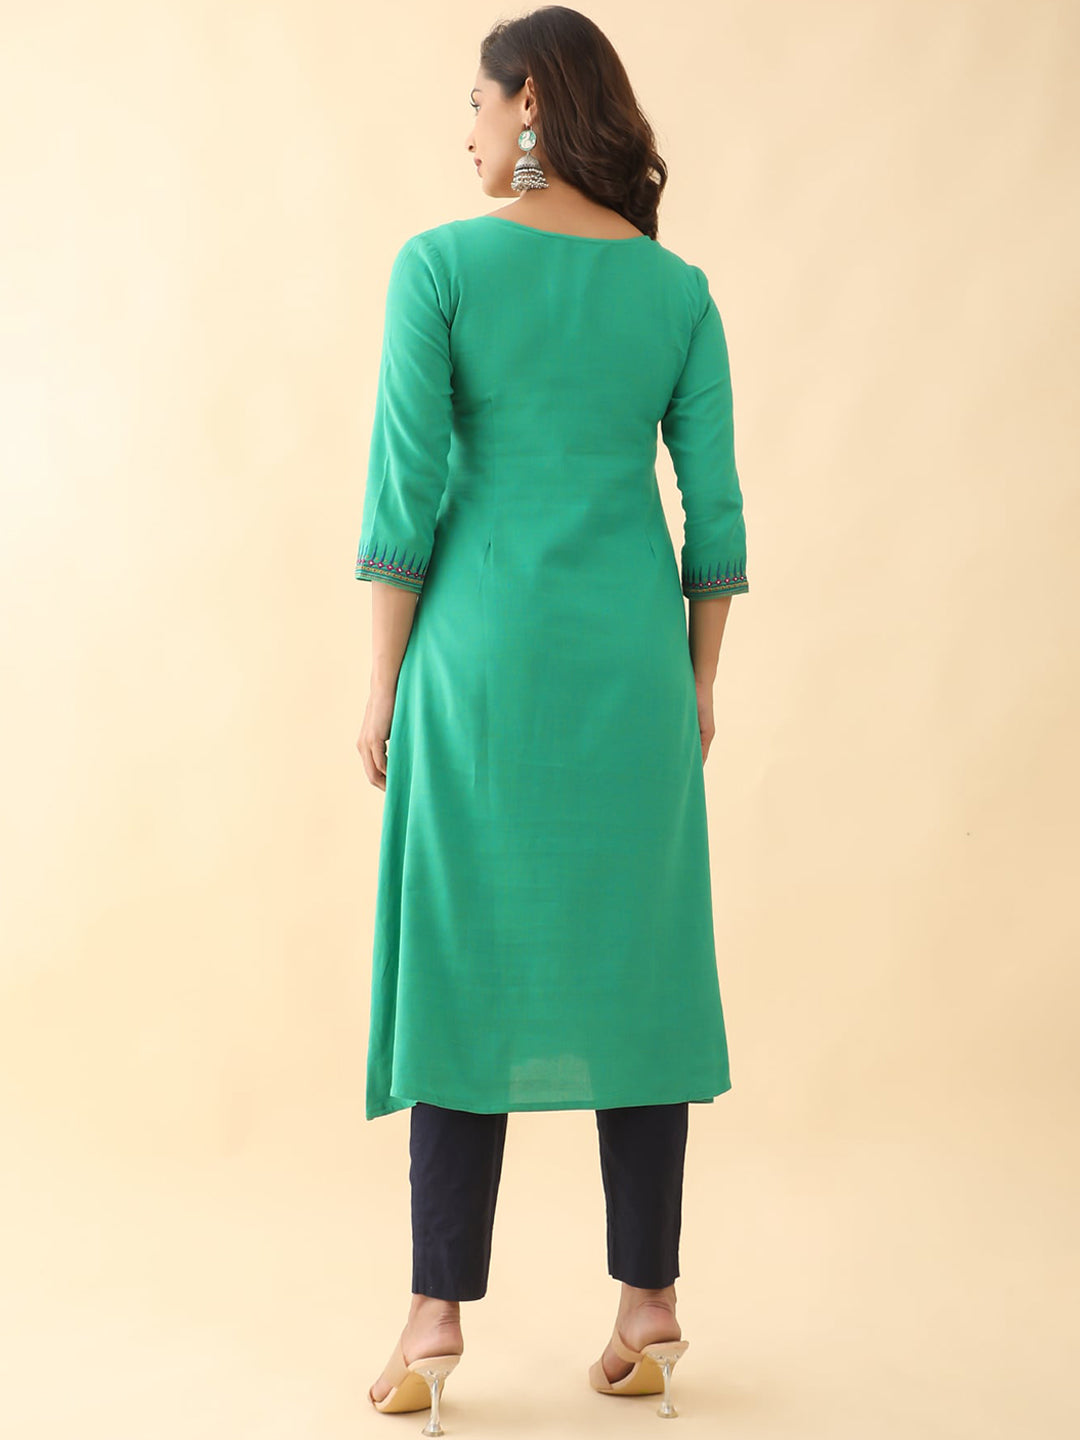 Jewelled Embroidered With Contrast Front Slit Kurta Green